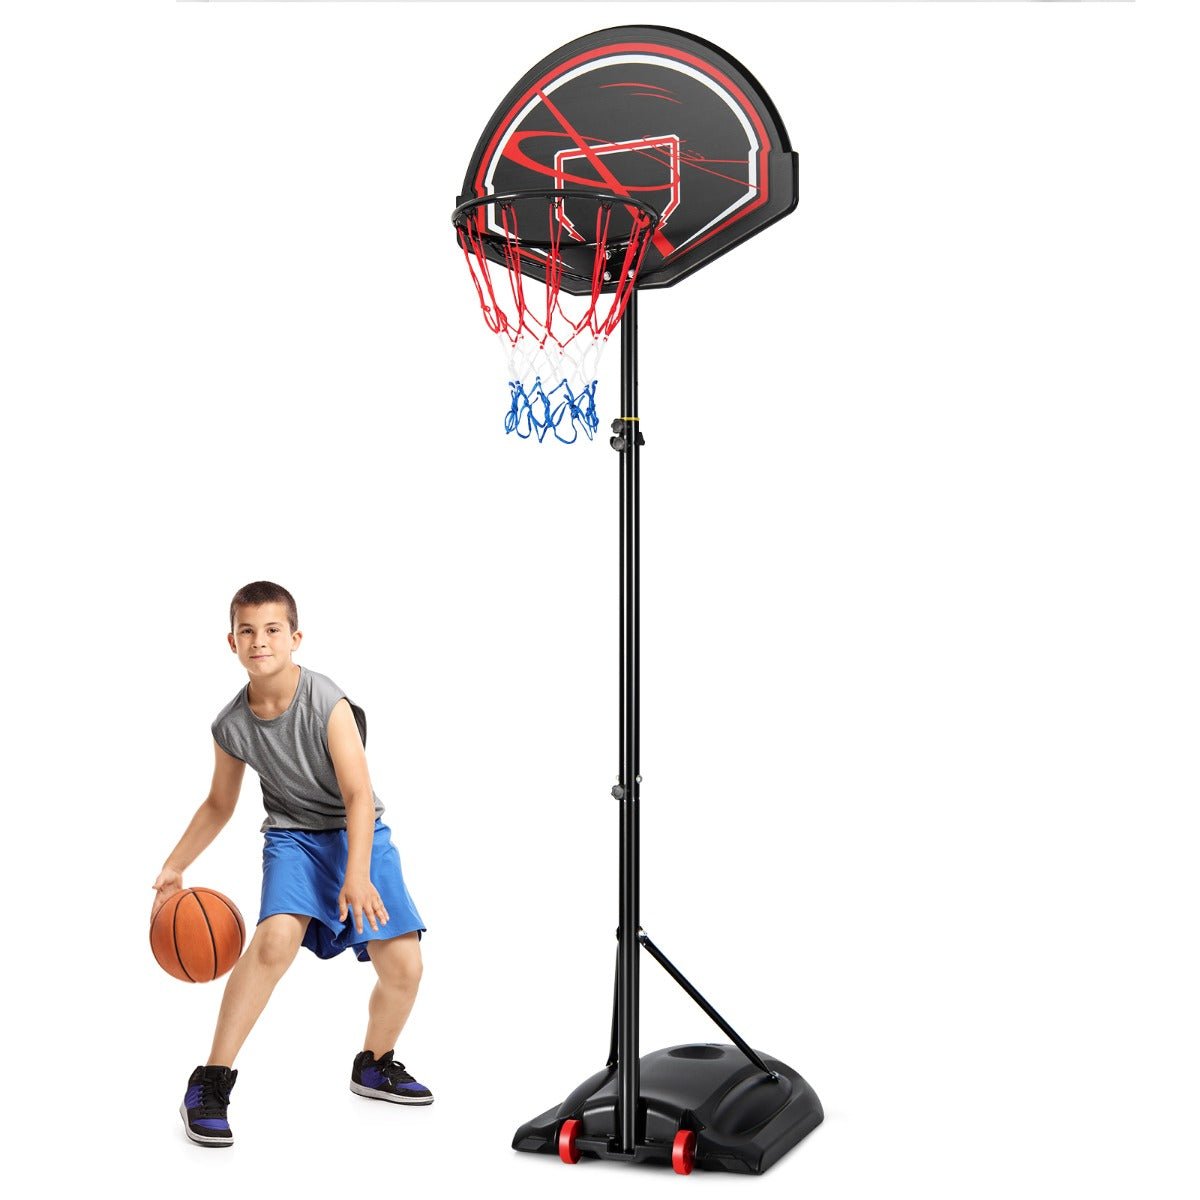 Take Your Basketball Game Anywhere - Shop Now!